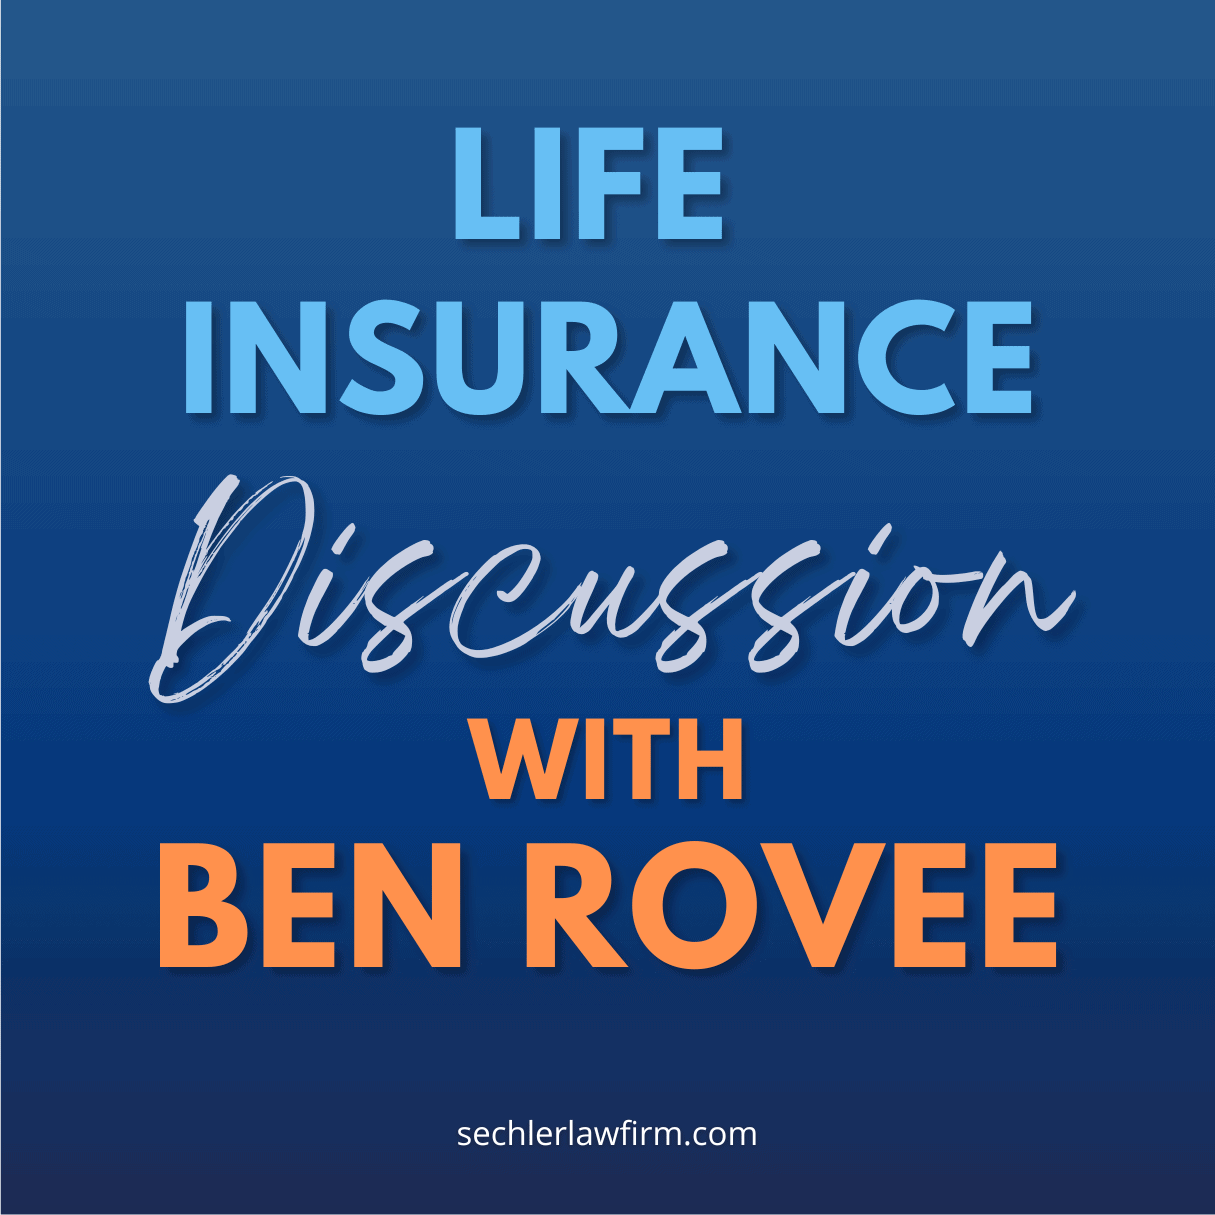 A Life Insurance Discussion with Ben Rovee